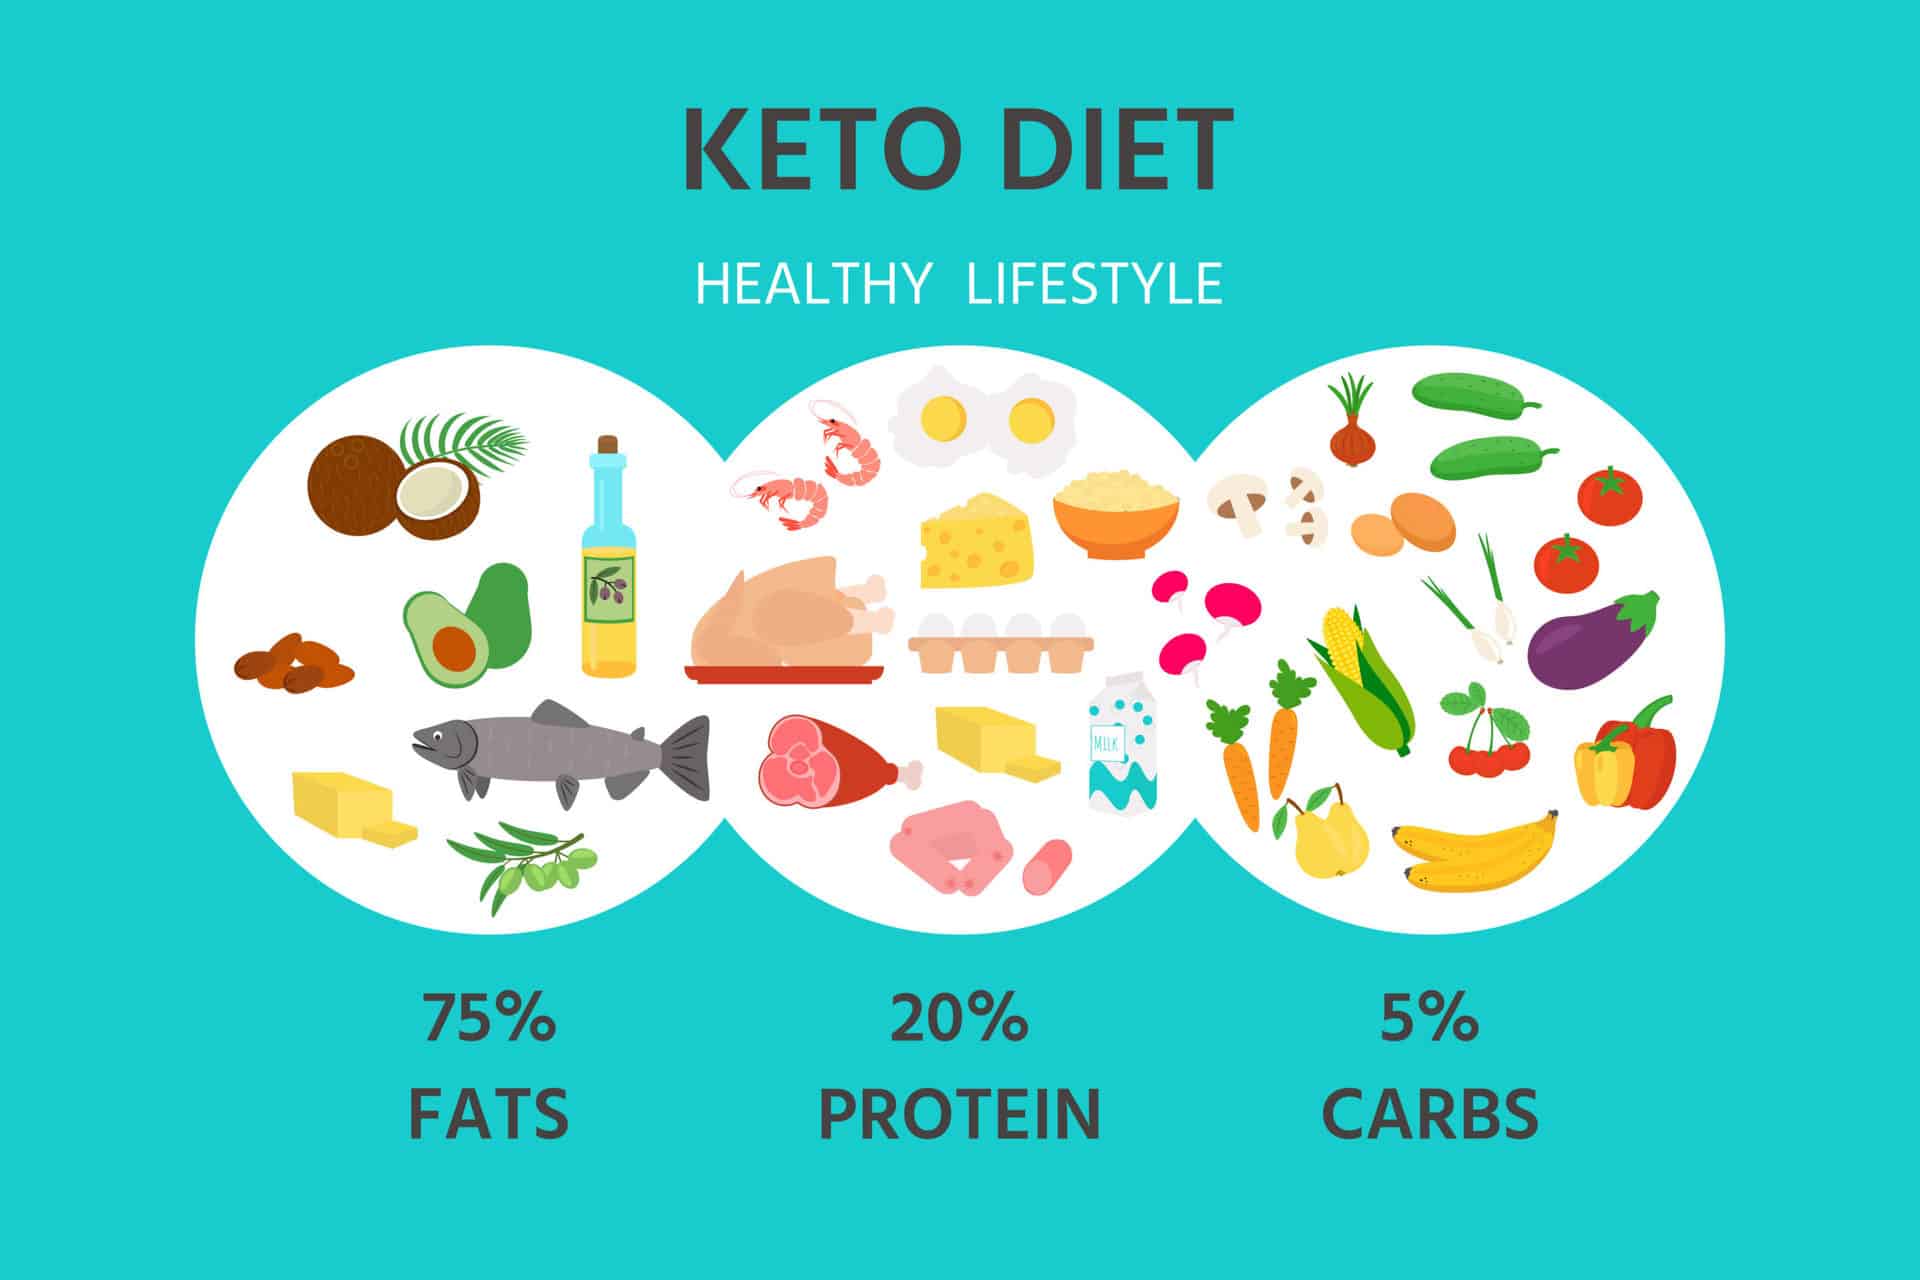 Easy Foundations to Start Strong on the Ketogenic Diet